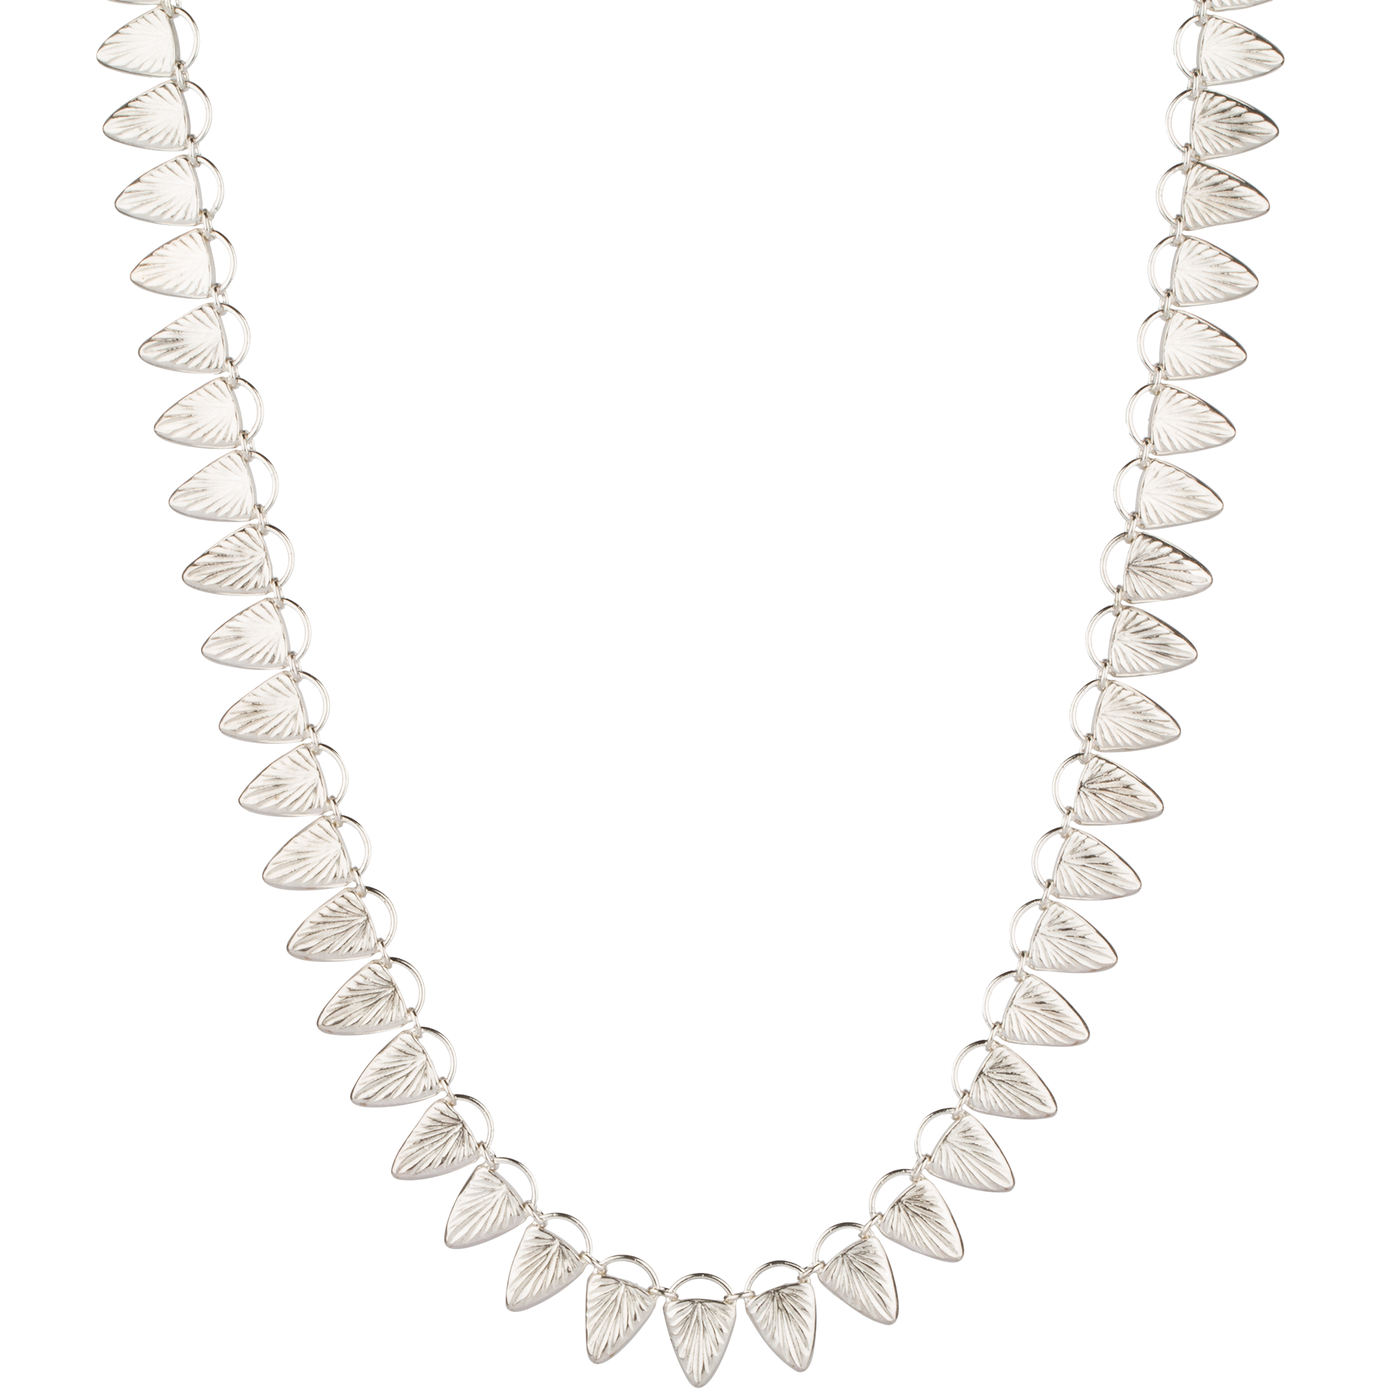 Sterling silver statement necklace made of triangular carved links with a sunburst design on a white background alternate view | Corey Egan